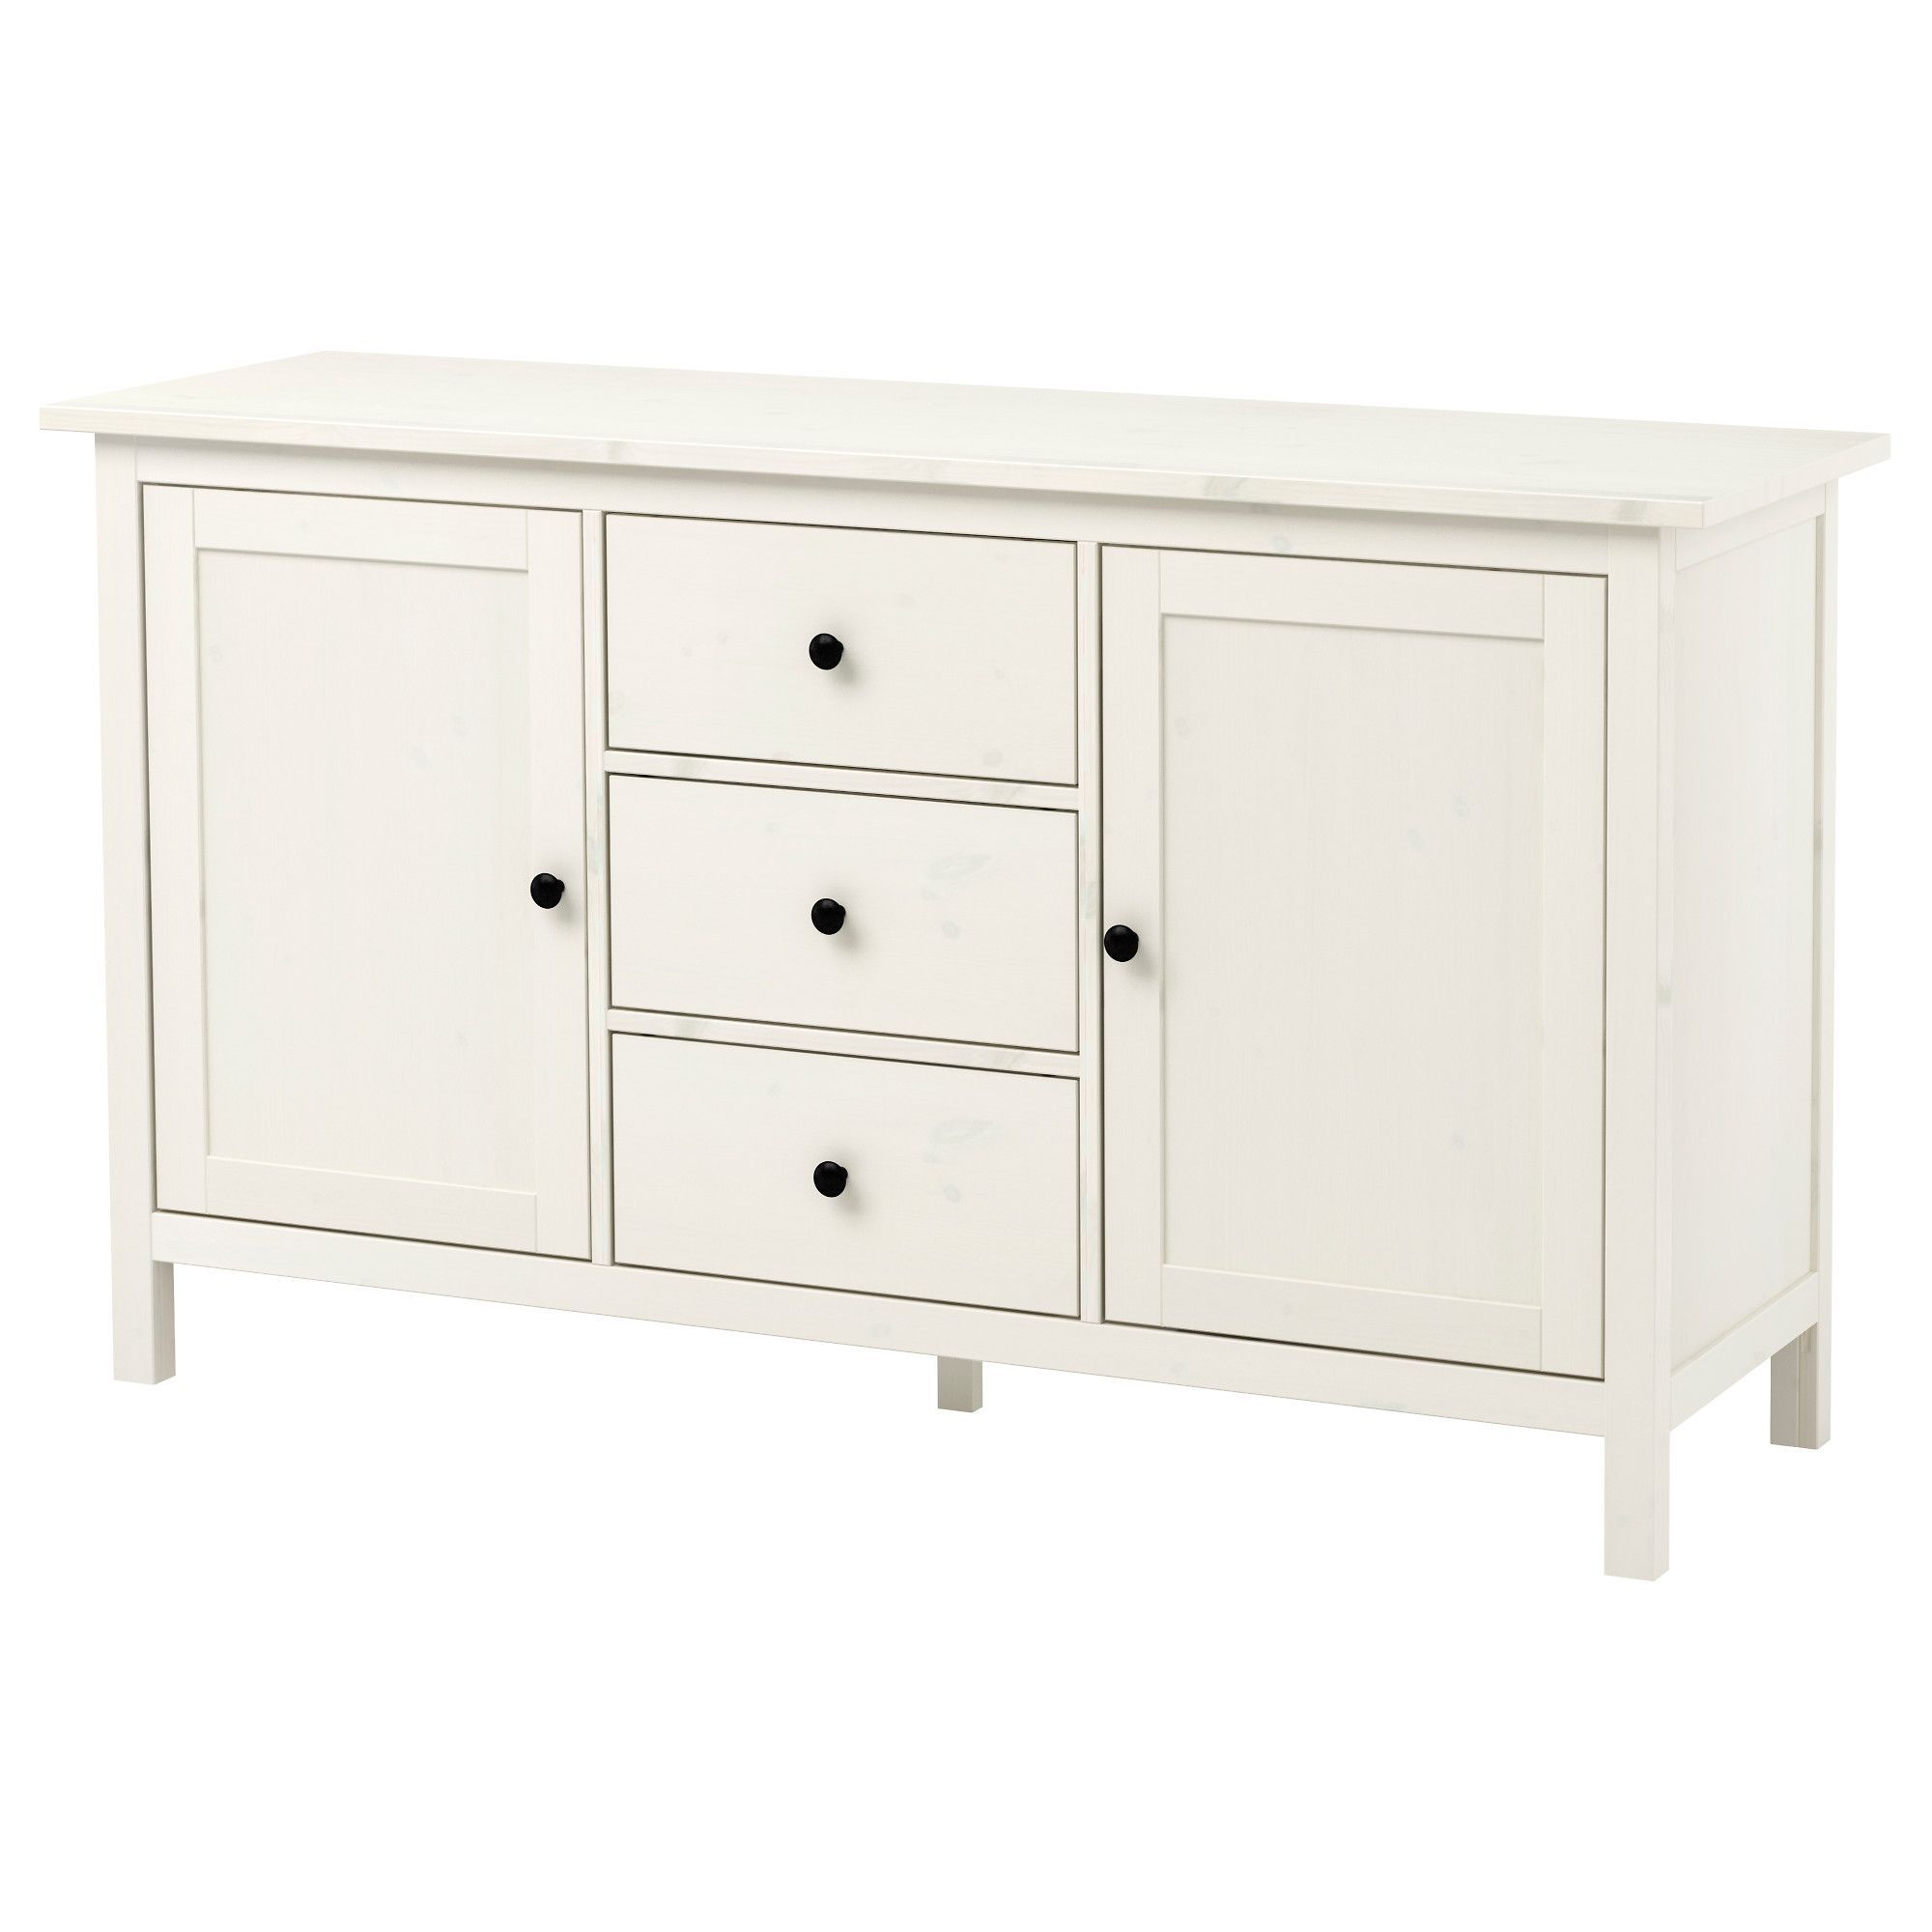 Hemnes Sideboard, White Stain | Closets, Storage & Organization For Latest Palazzo 87 Inch Sideboards (View 4 of 20)